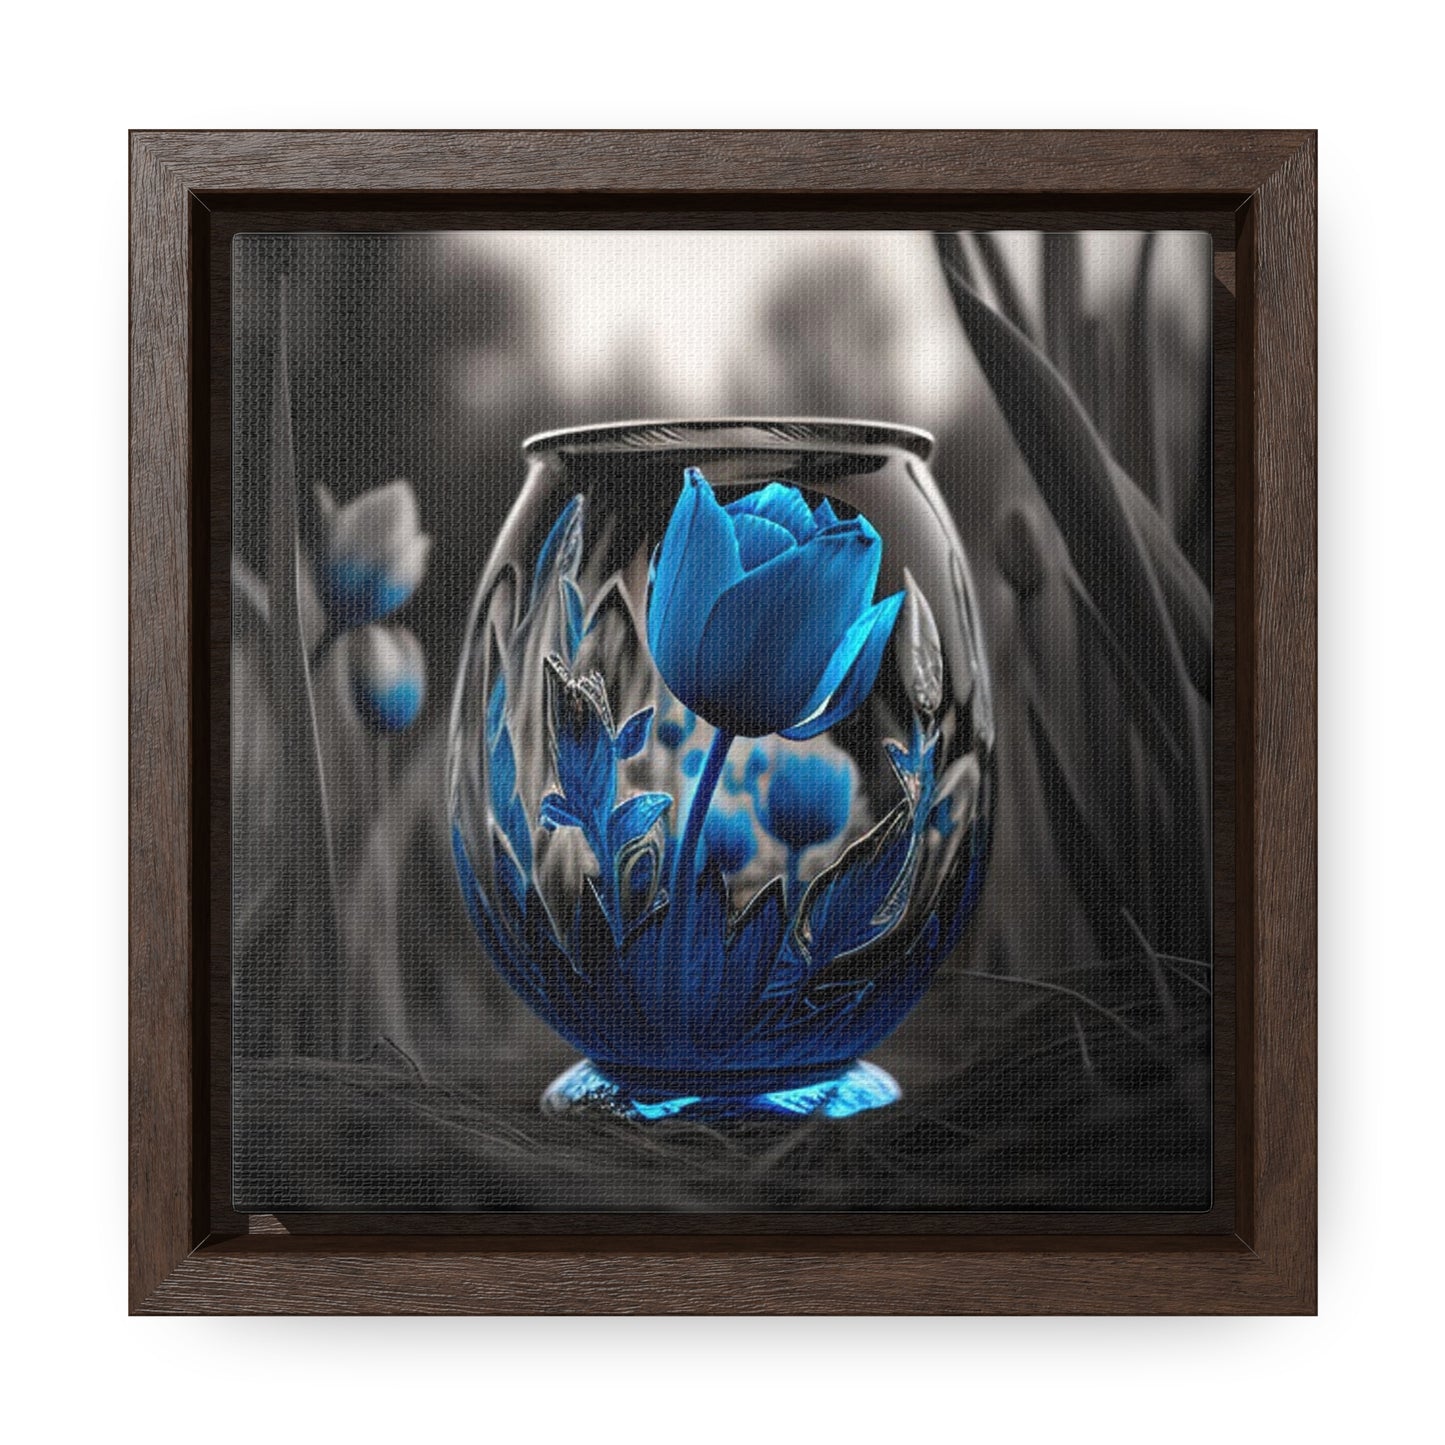 Gallery Canvas Wraps, Square Frame Tulip Blue 2